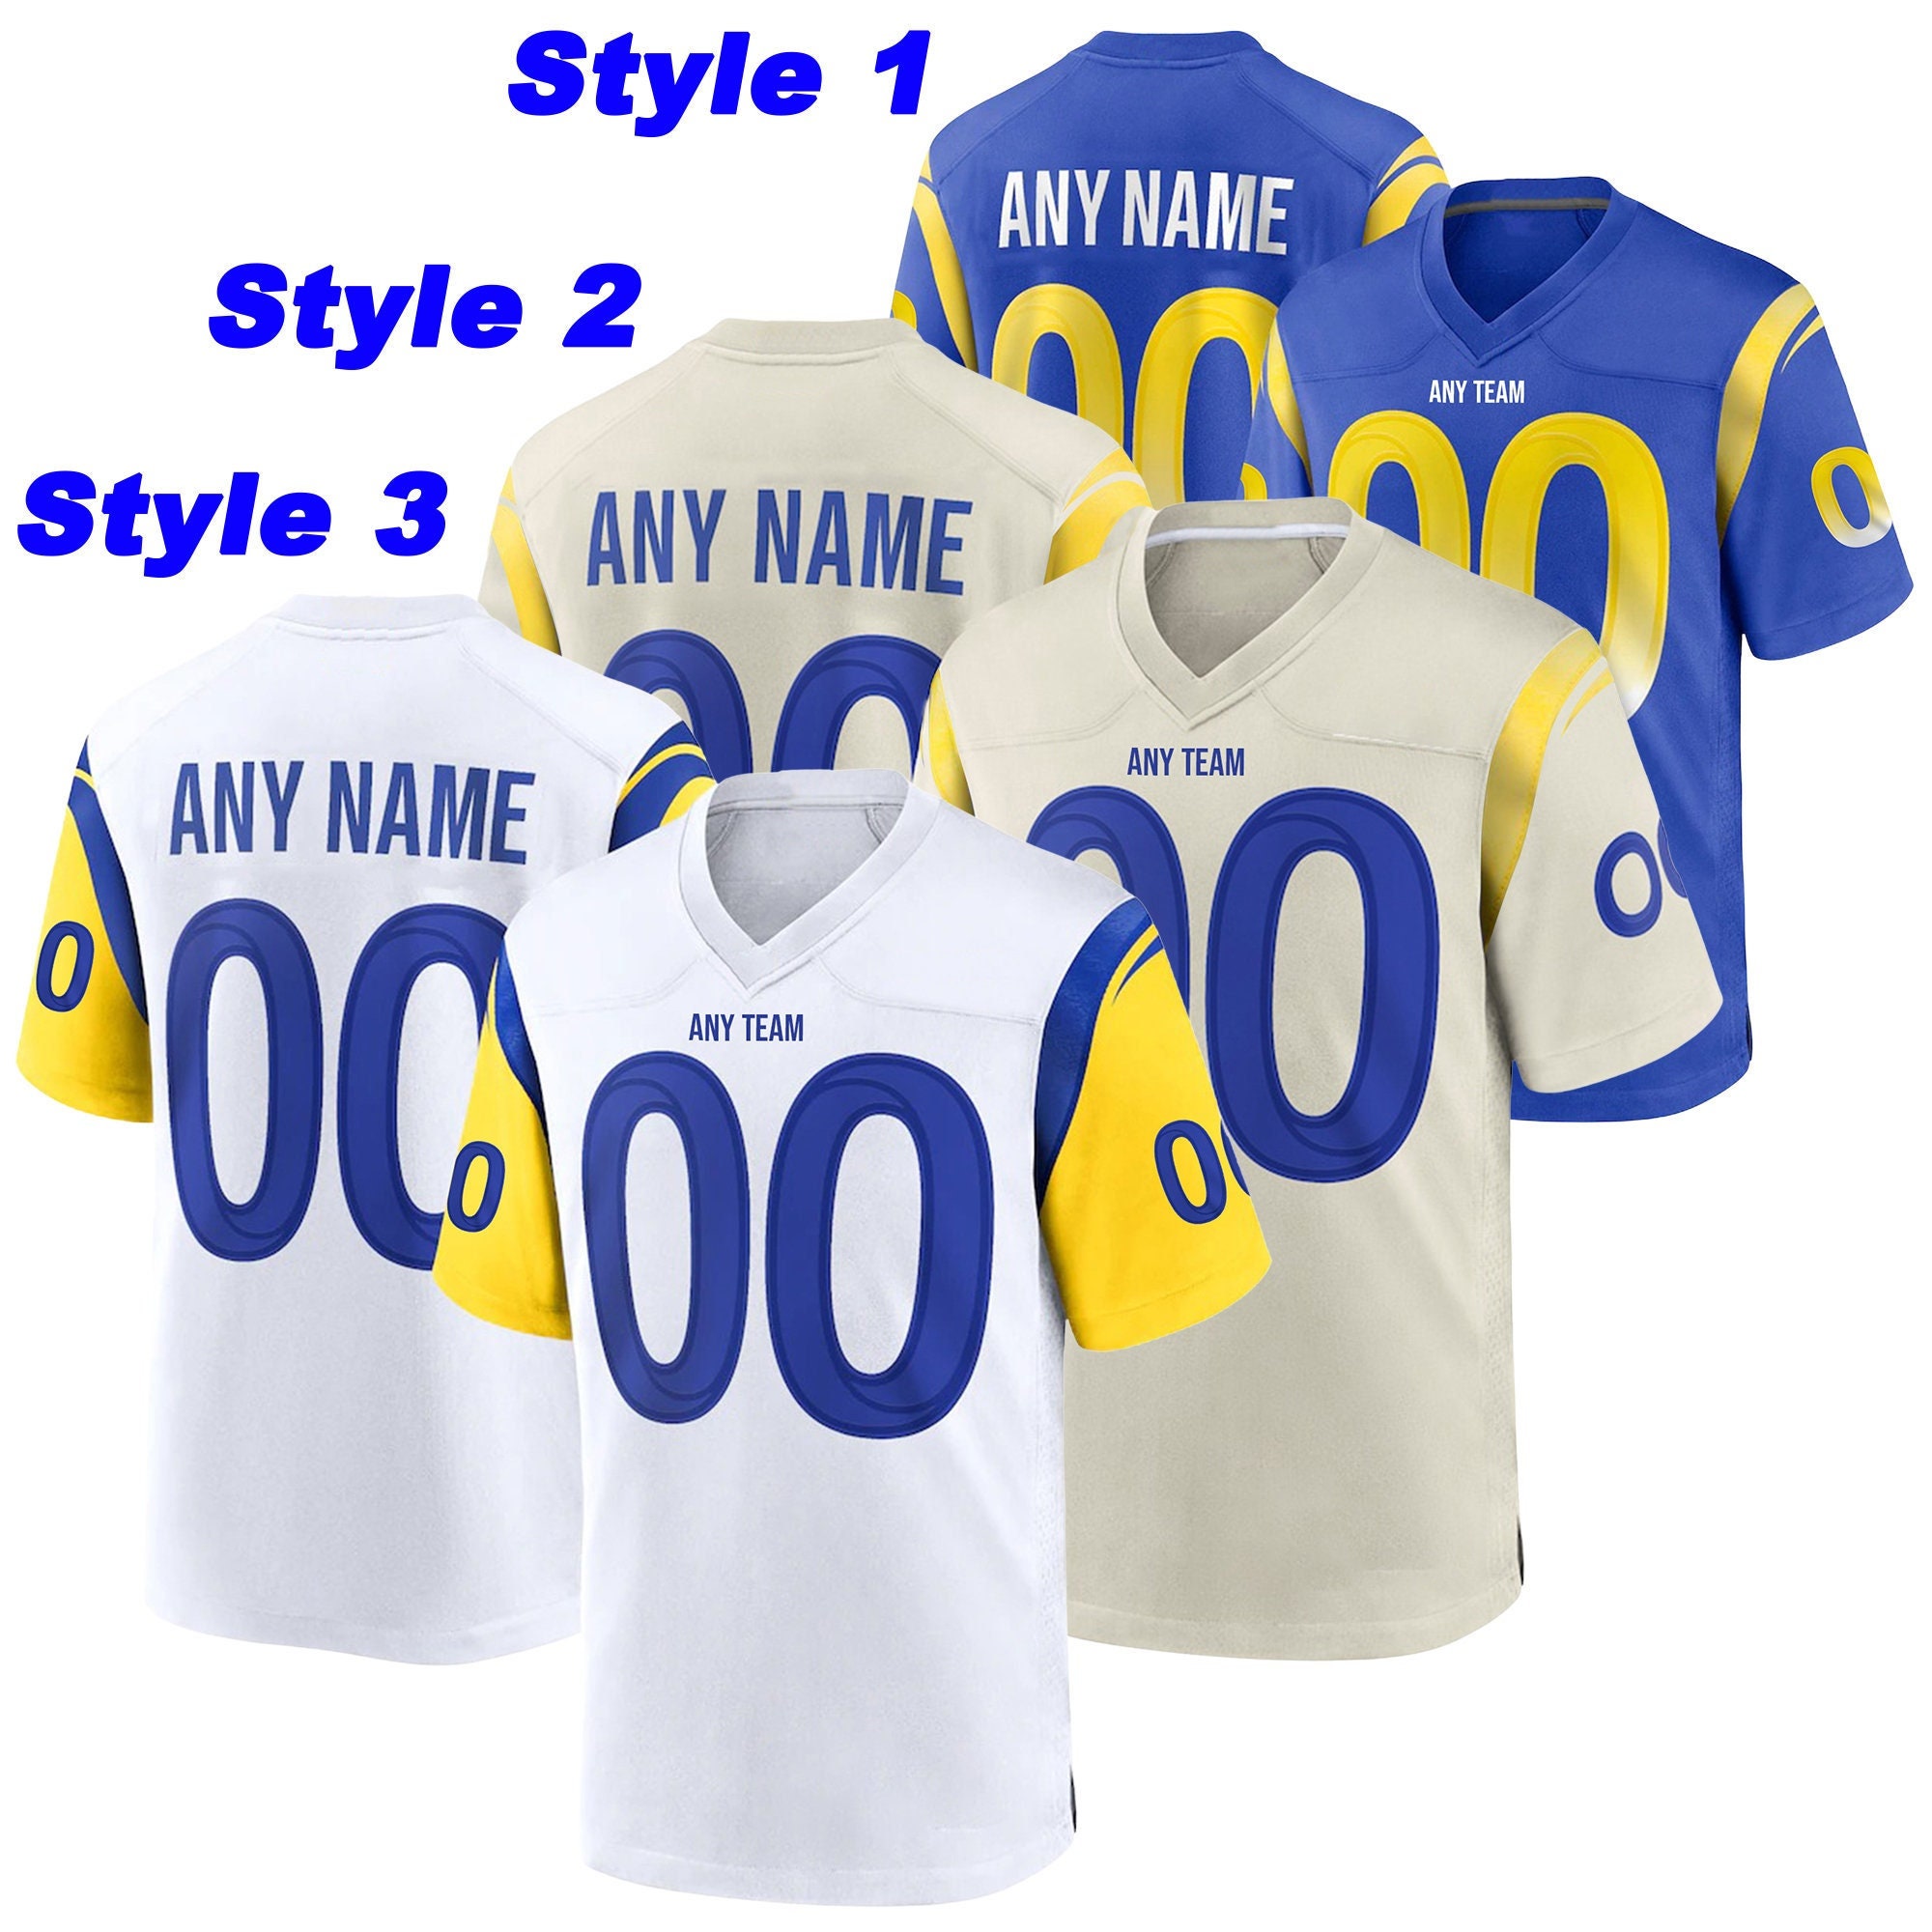 rams jersey outfit men